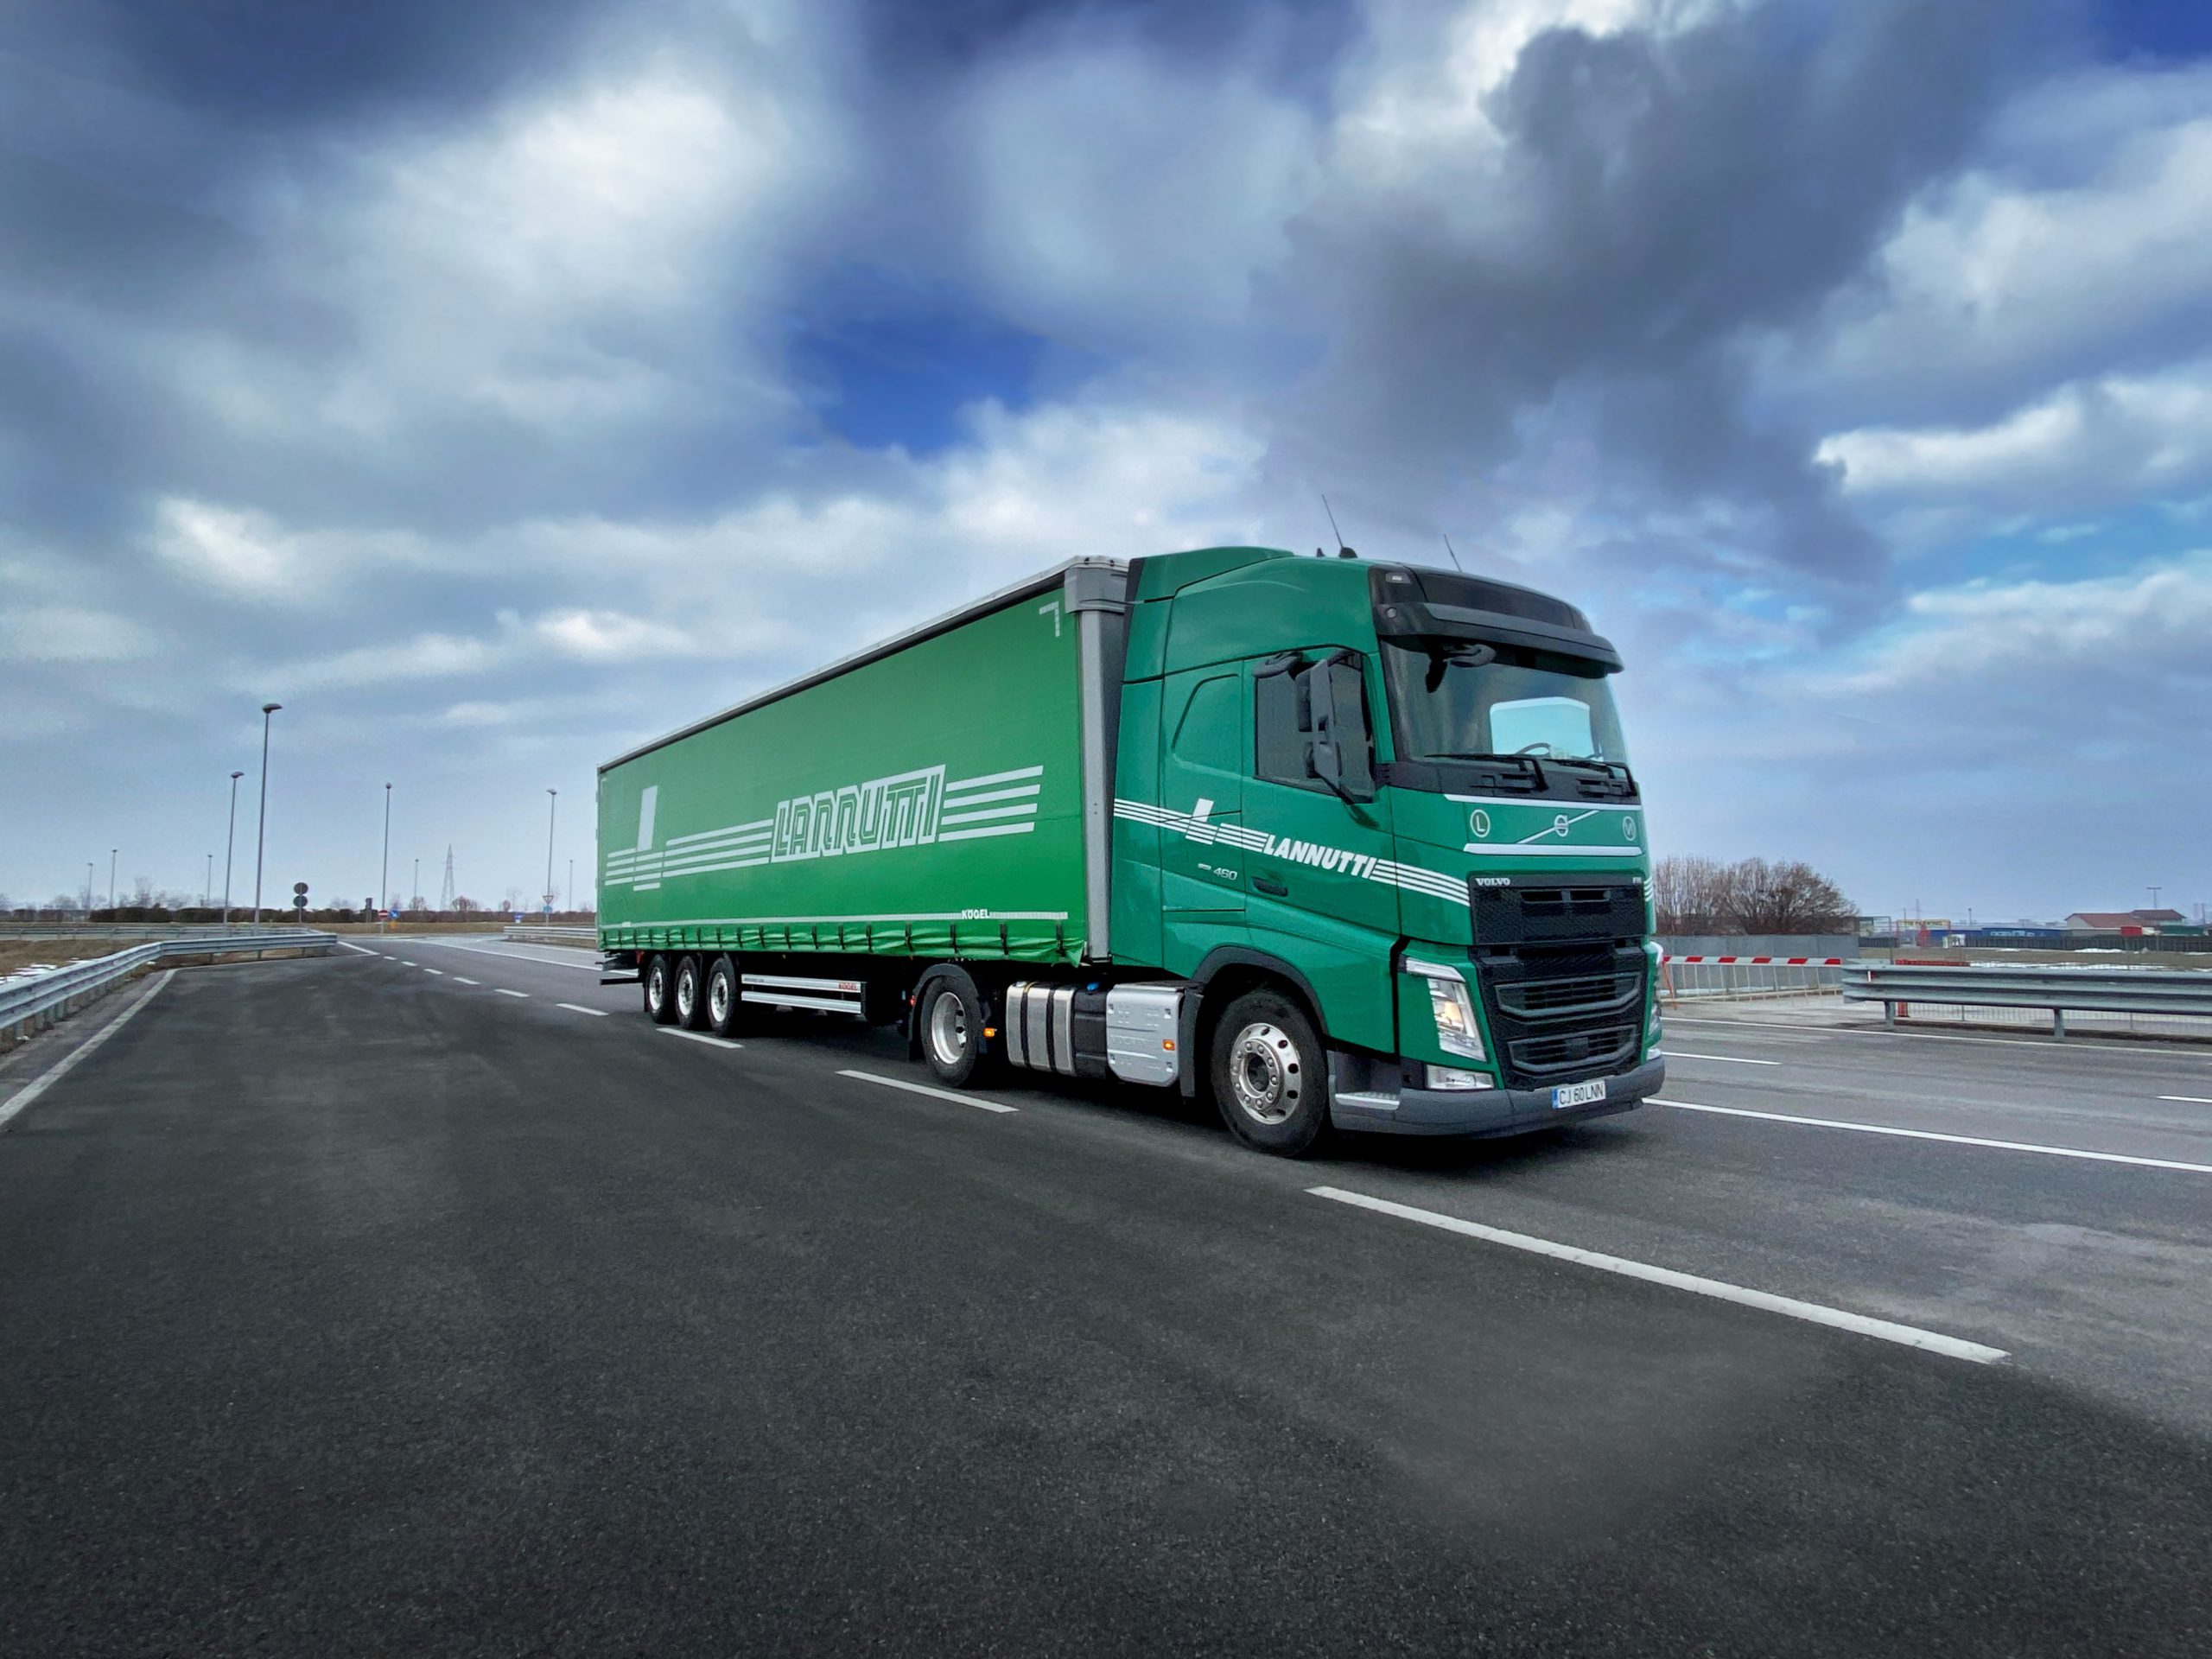 Big contract: Italian haulier buys 1,000 Volvo trucks equipped with the latest fuel-saving technology